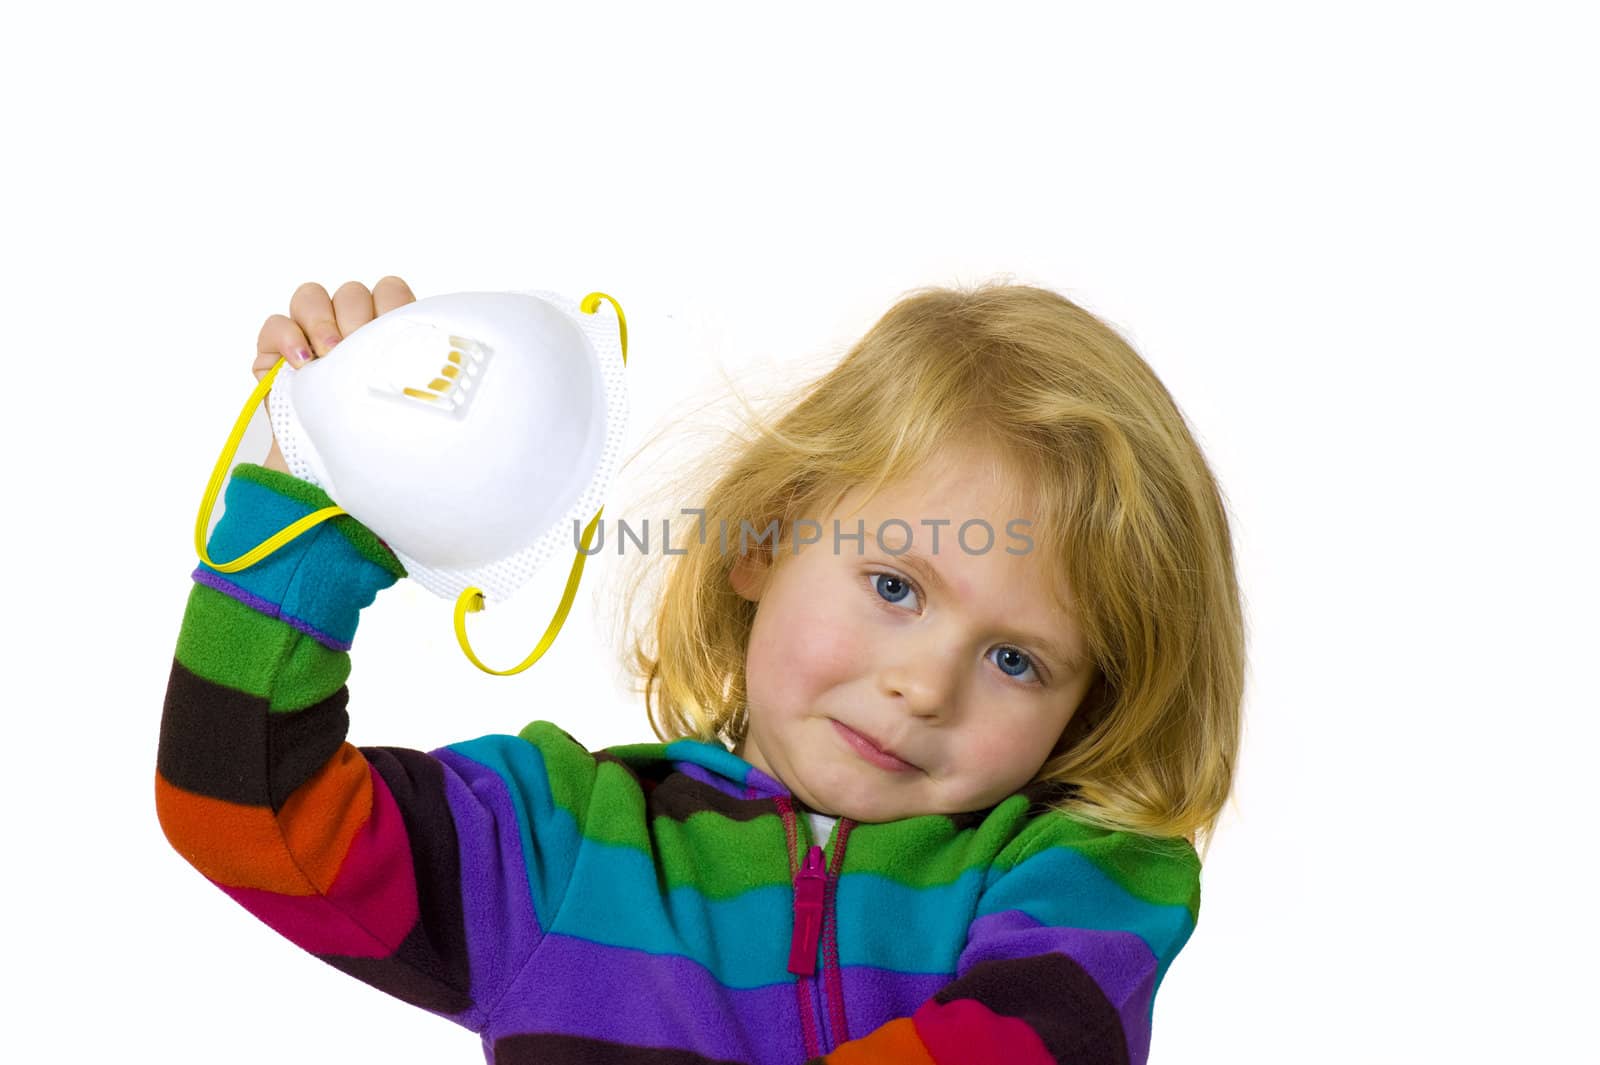 A girl holding up a N95 flu mask